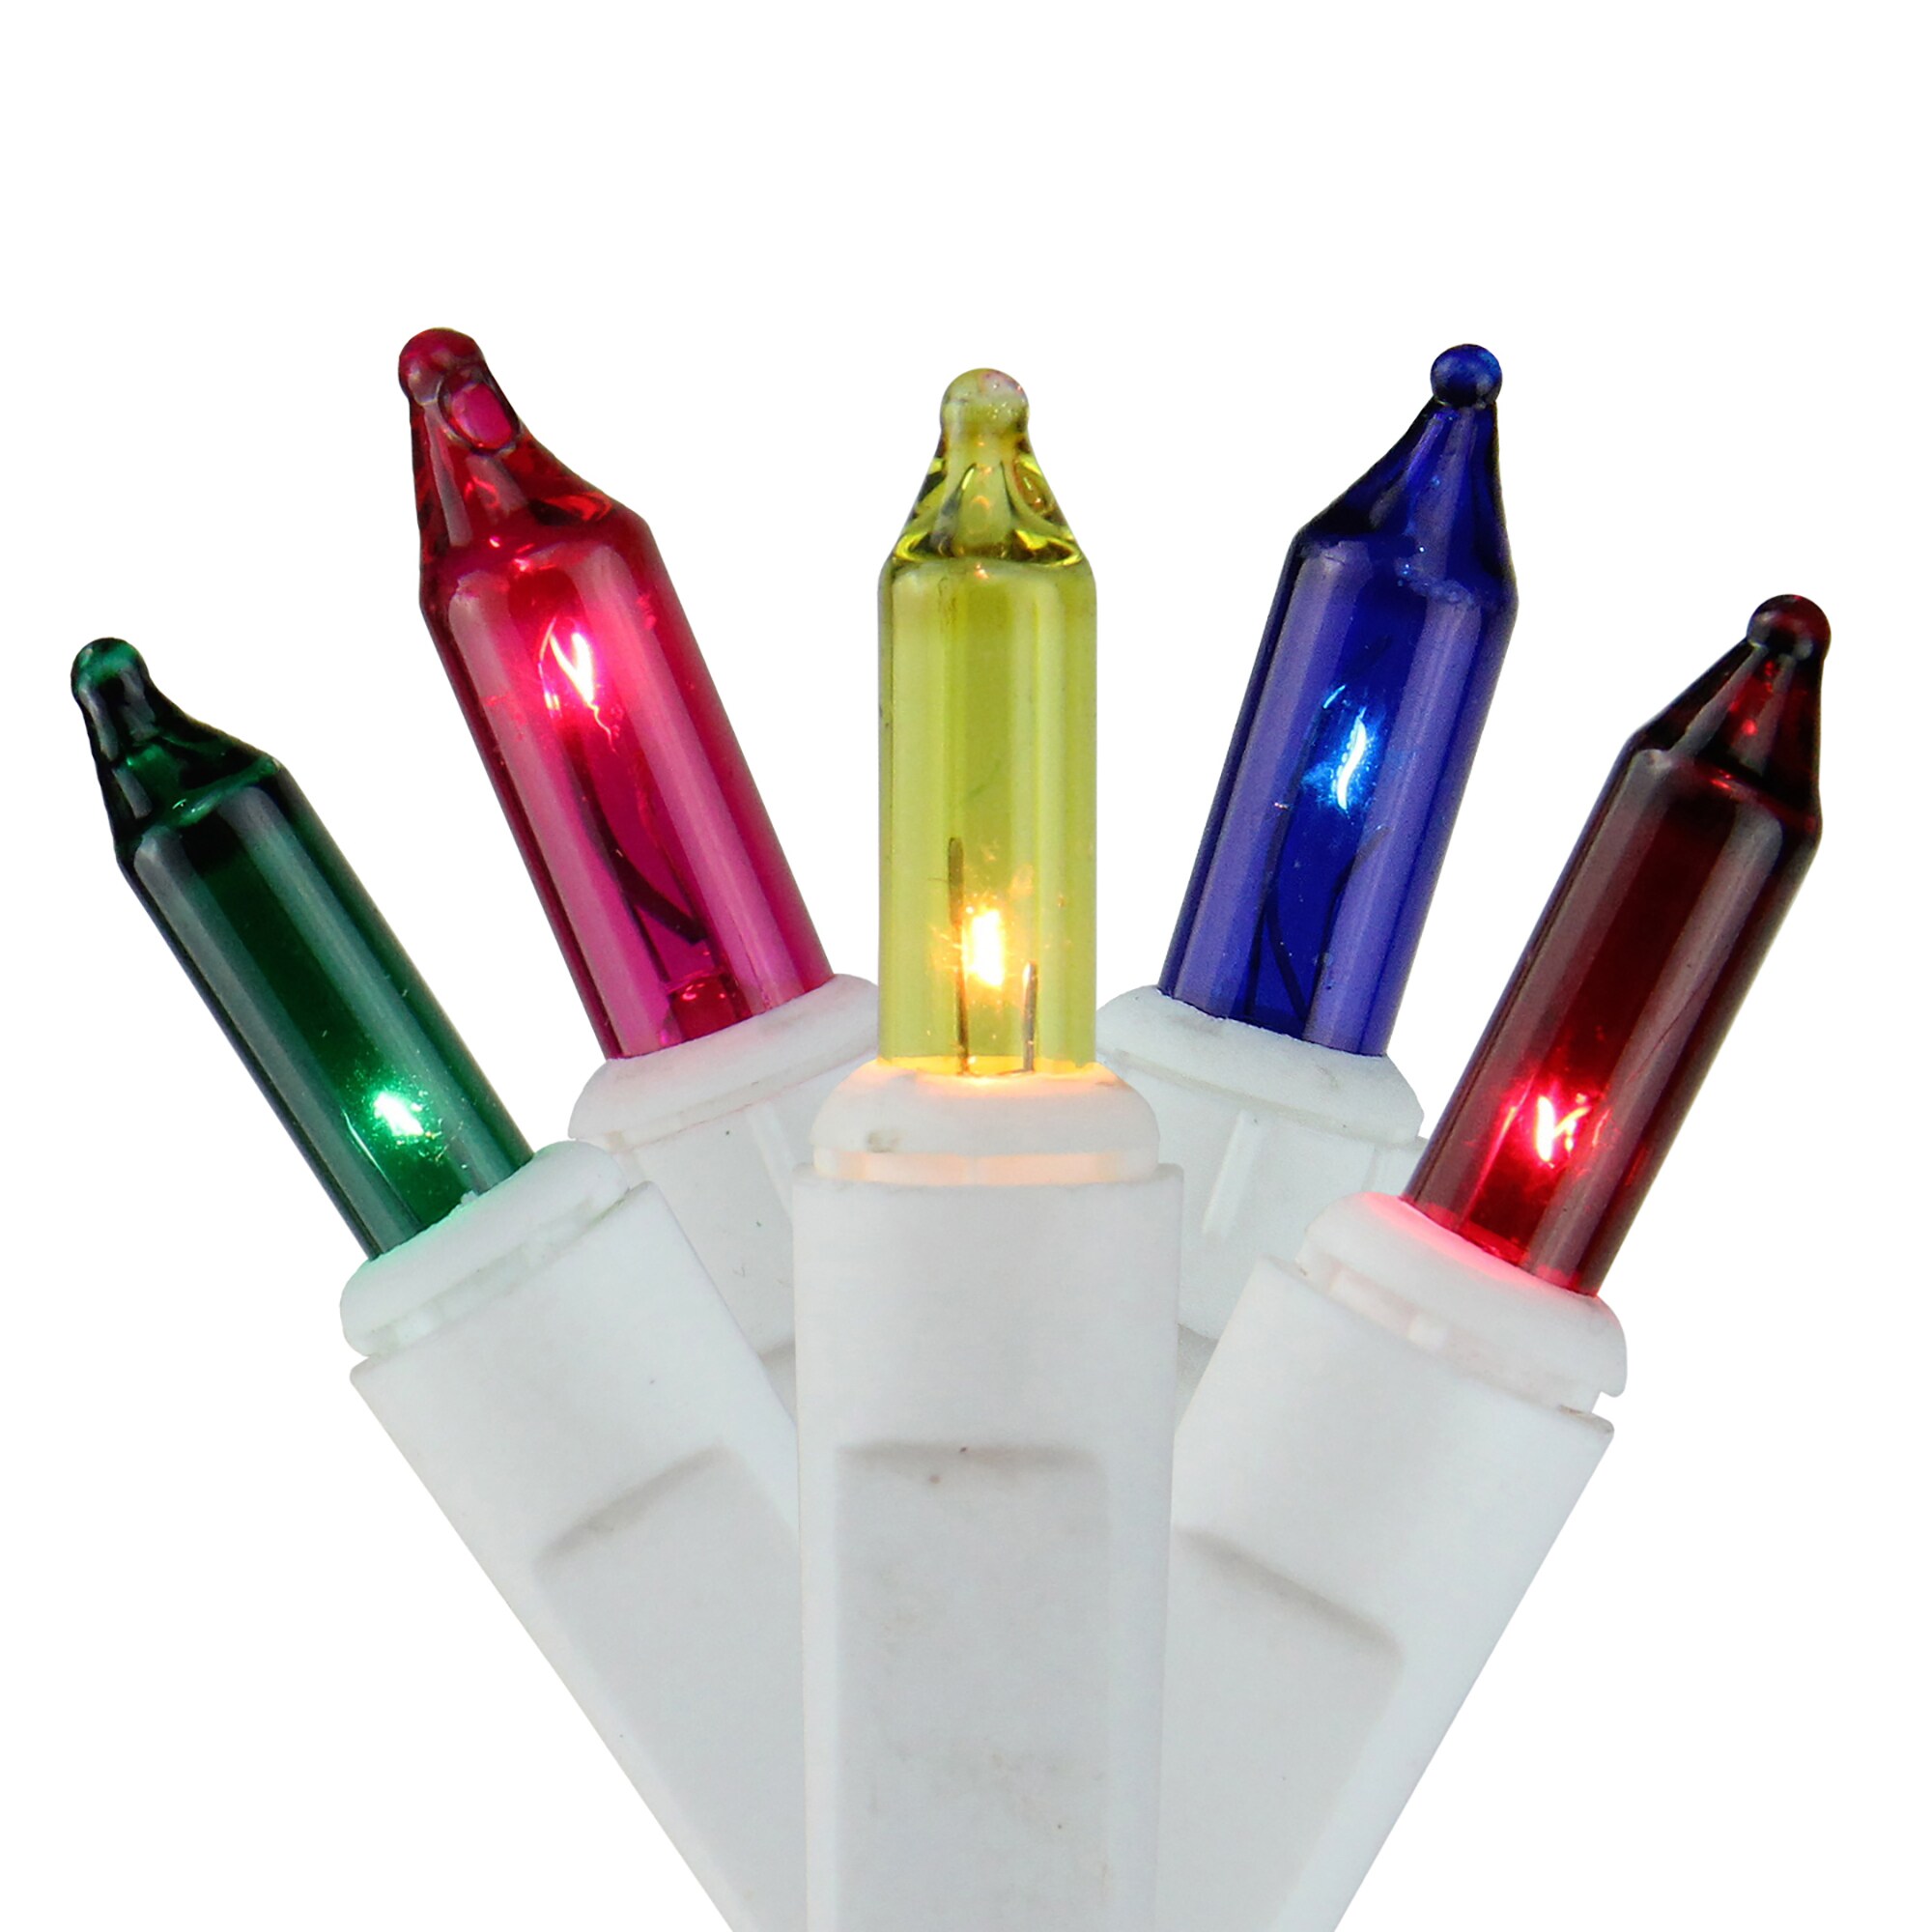 Multicolor Christmas Icicle Lights at Lowes.com